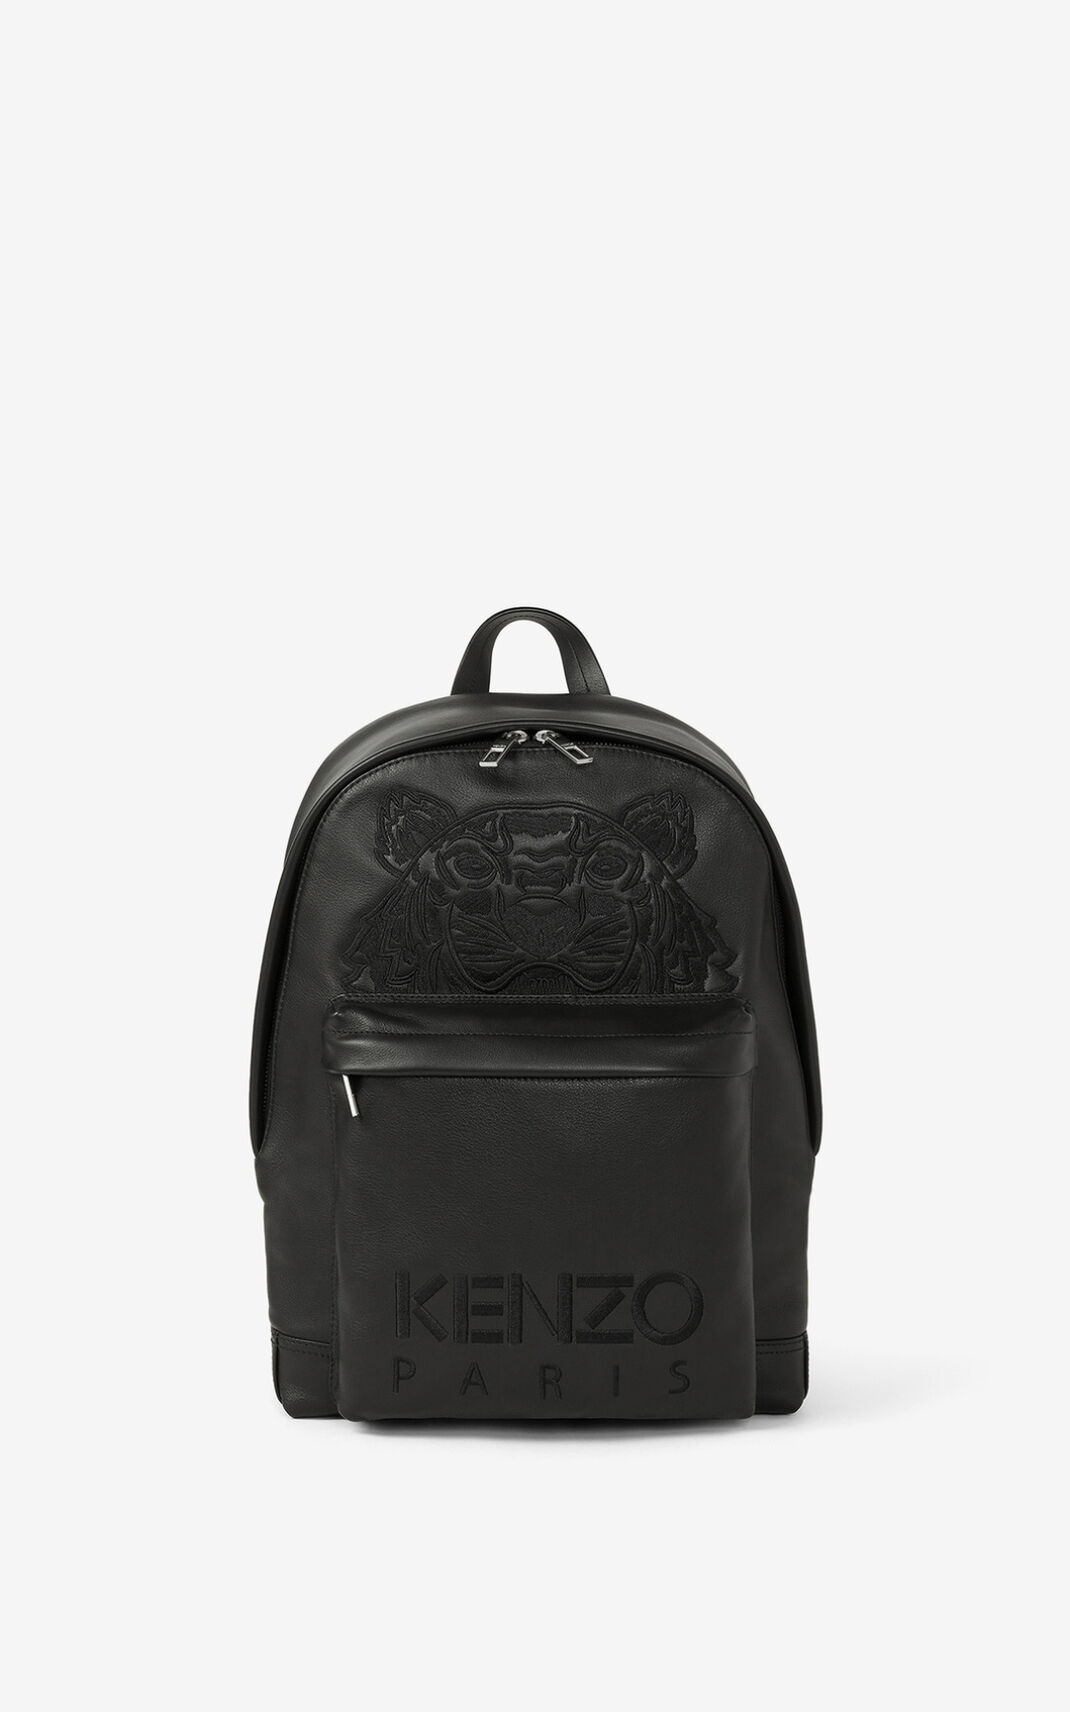 Kenzo Tiger leather Backpack Black For Mens 1849OXHUC